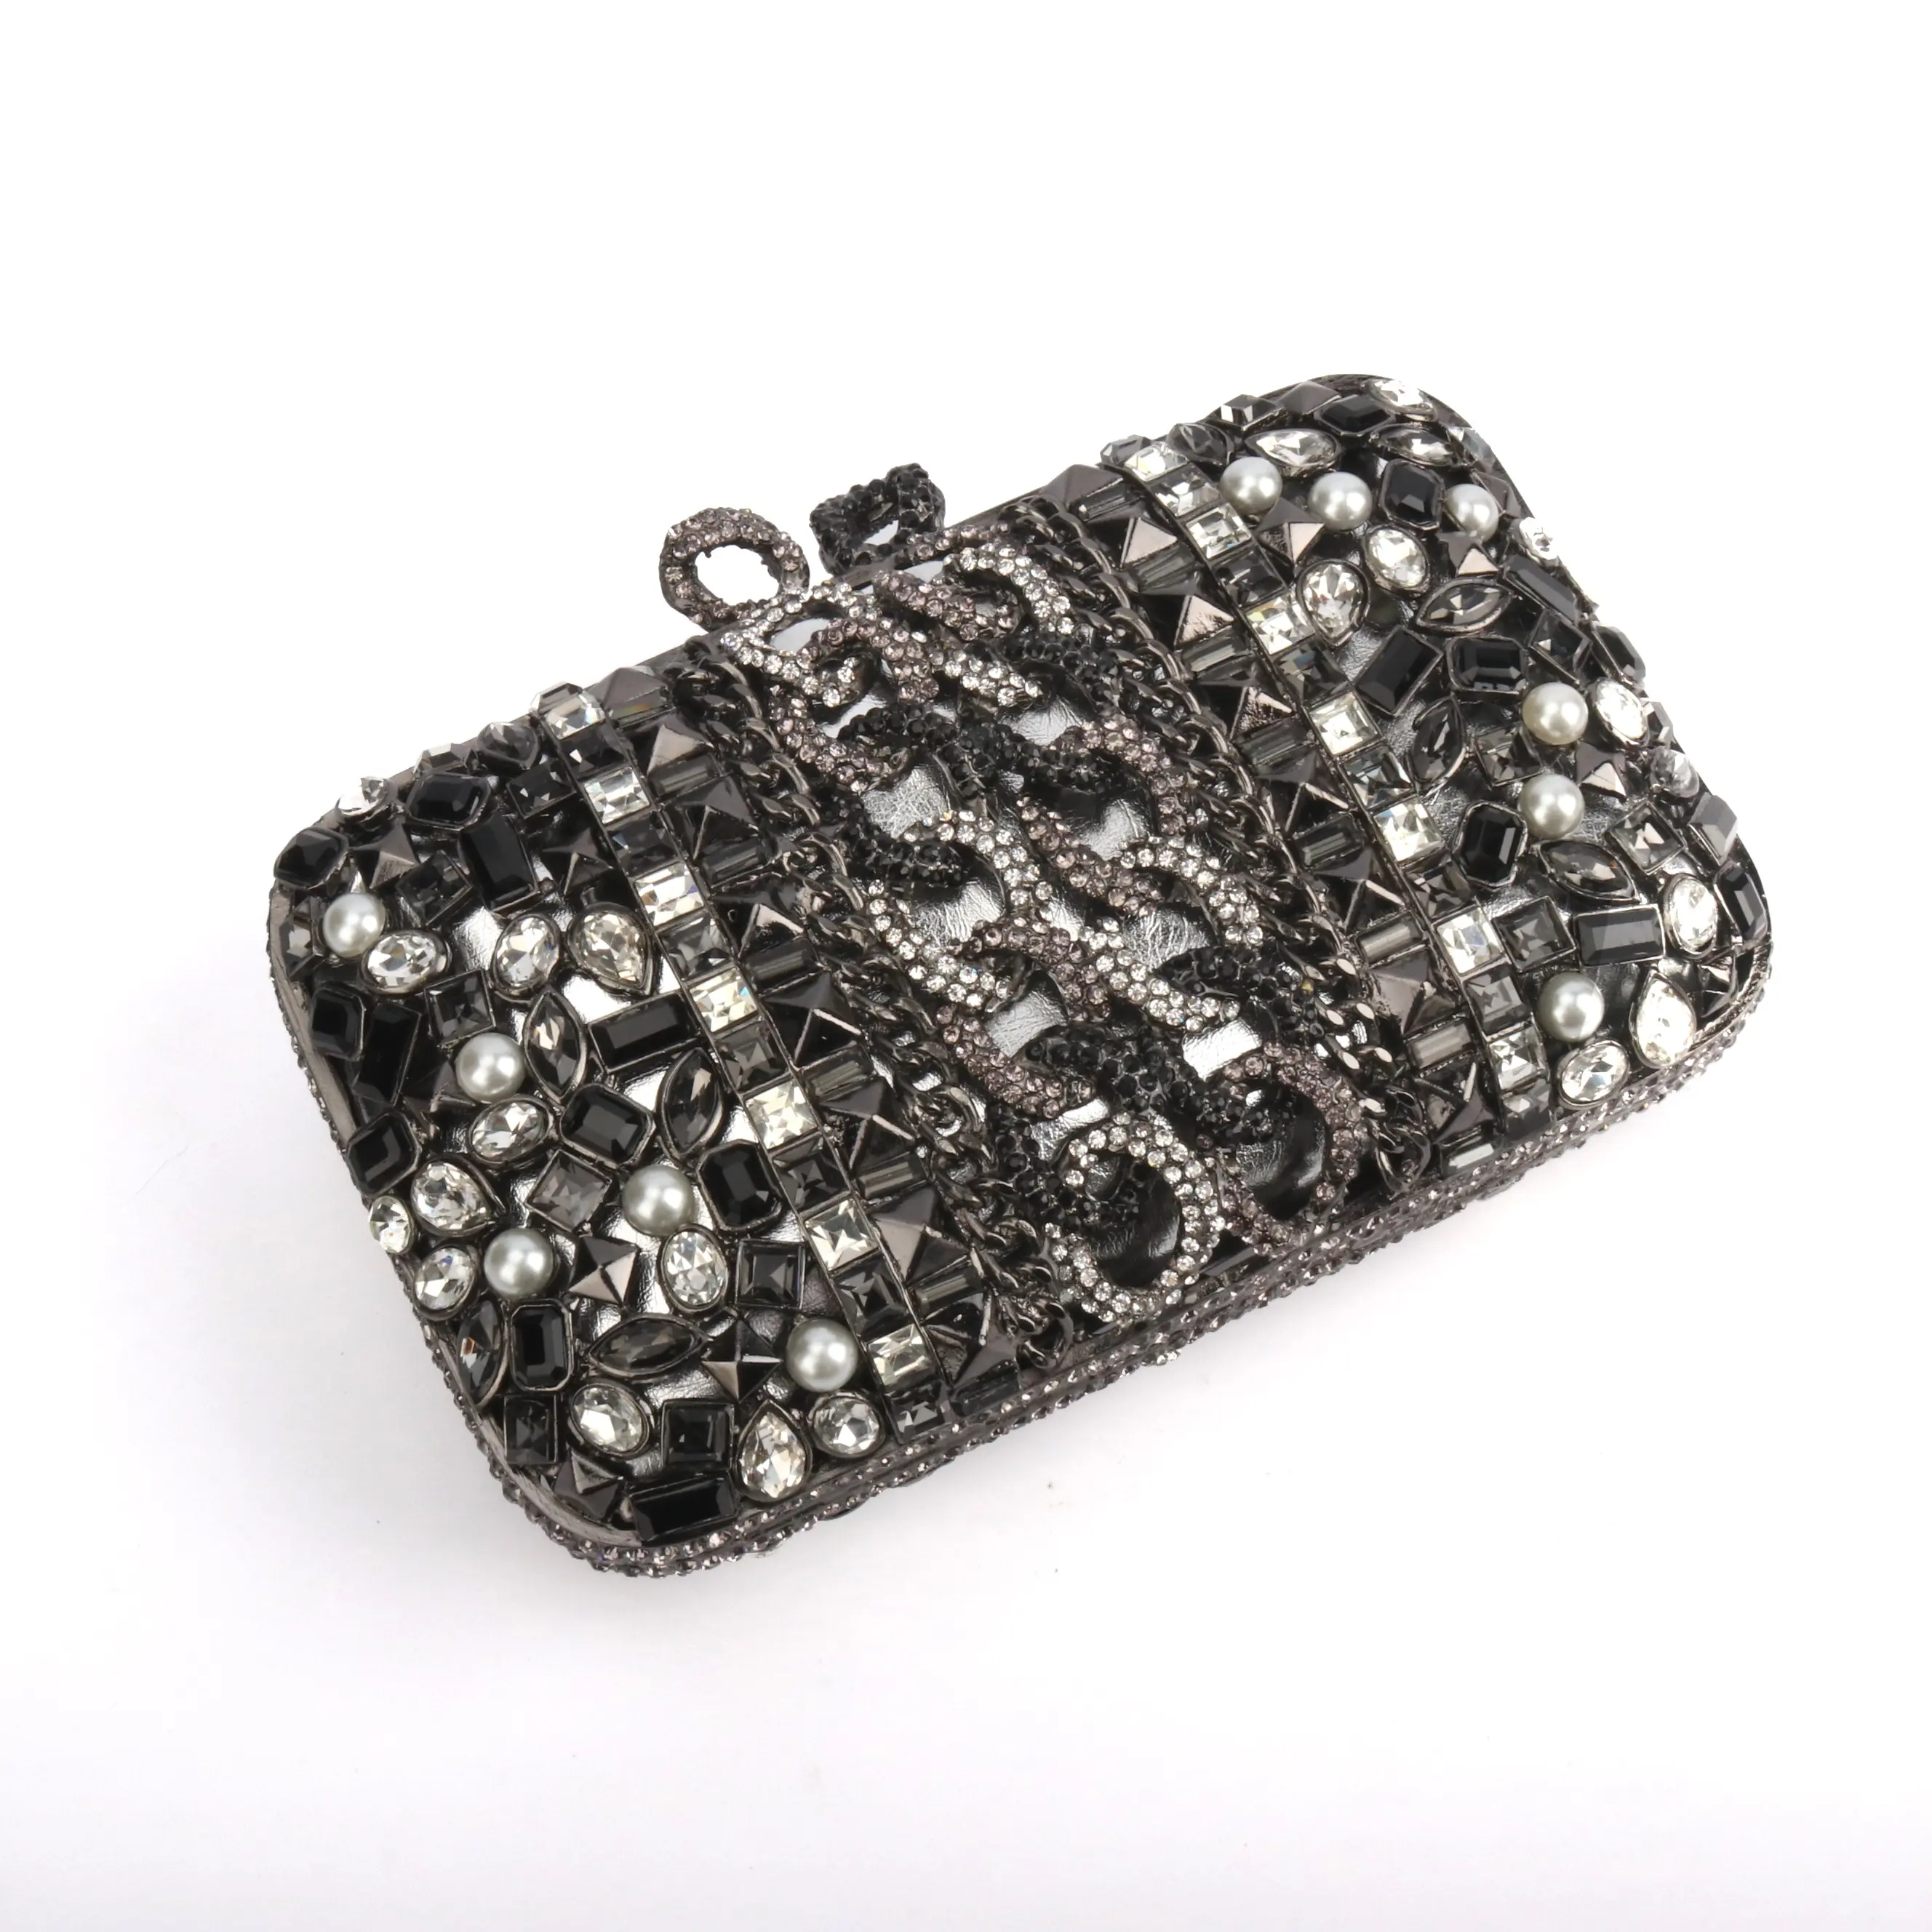 Luxury Crystal Rhinestone Clutch Purse Gun metal Florals Evening Bag for Wedding Party Wholesales from China Supplier